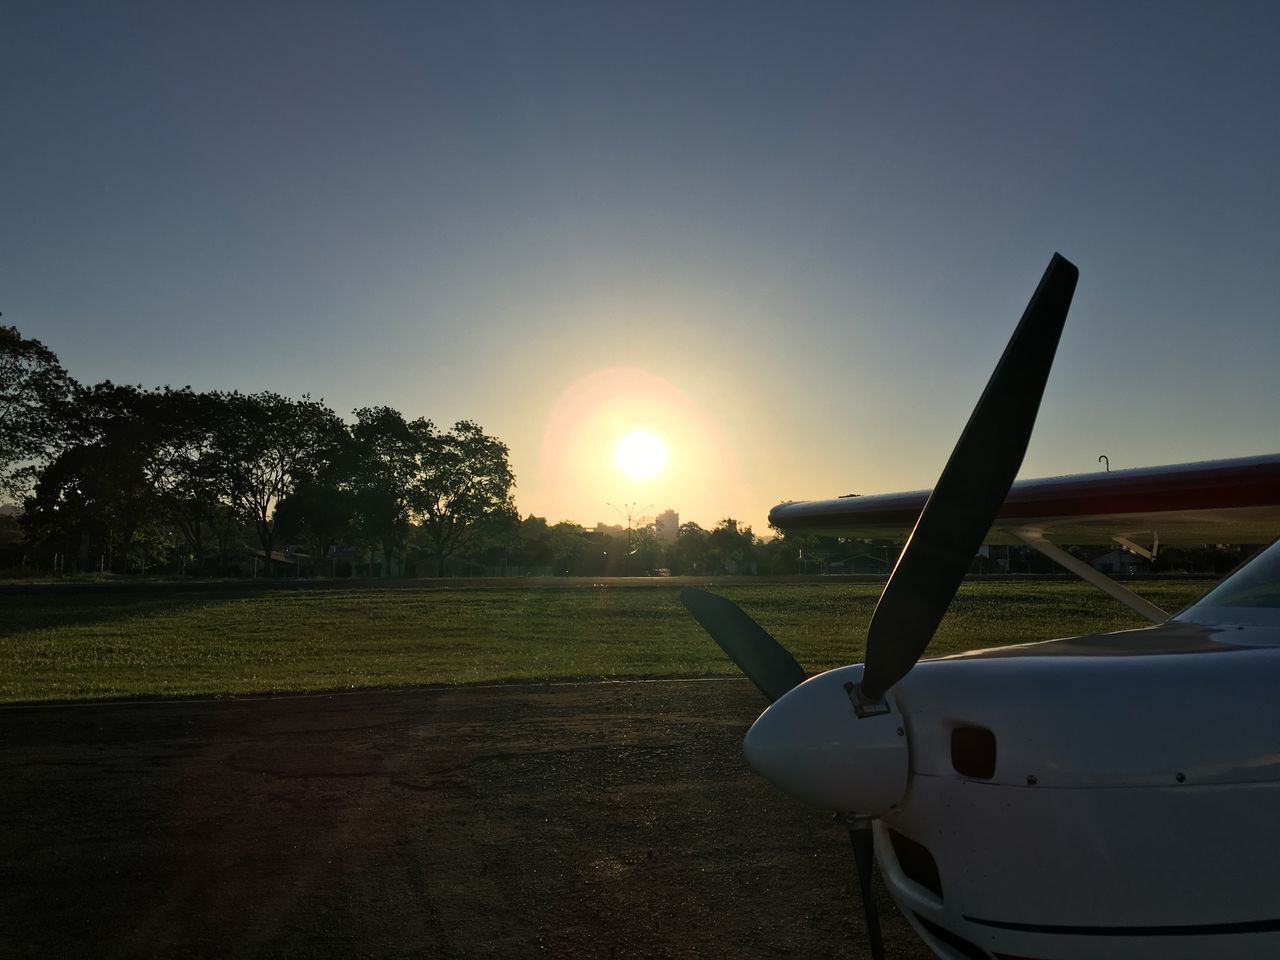 AIRPLANE ON FIELD AGAINST BRIGHT SUN